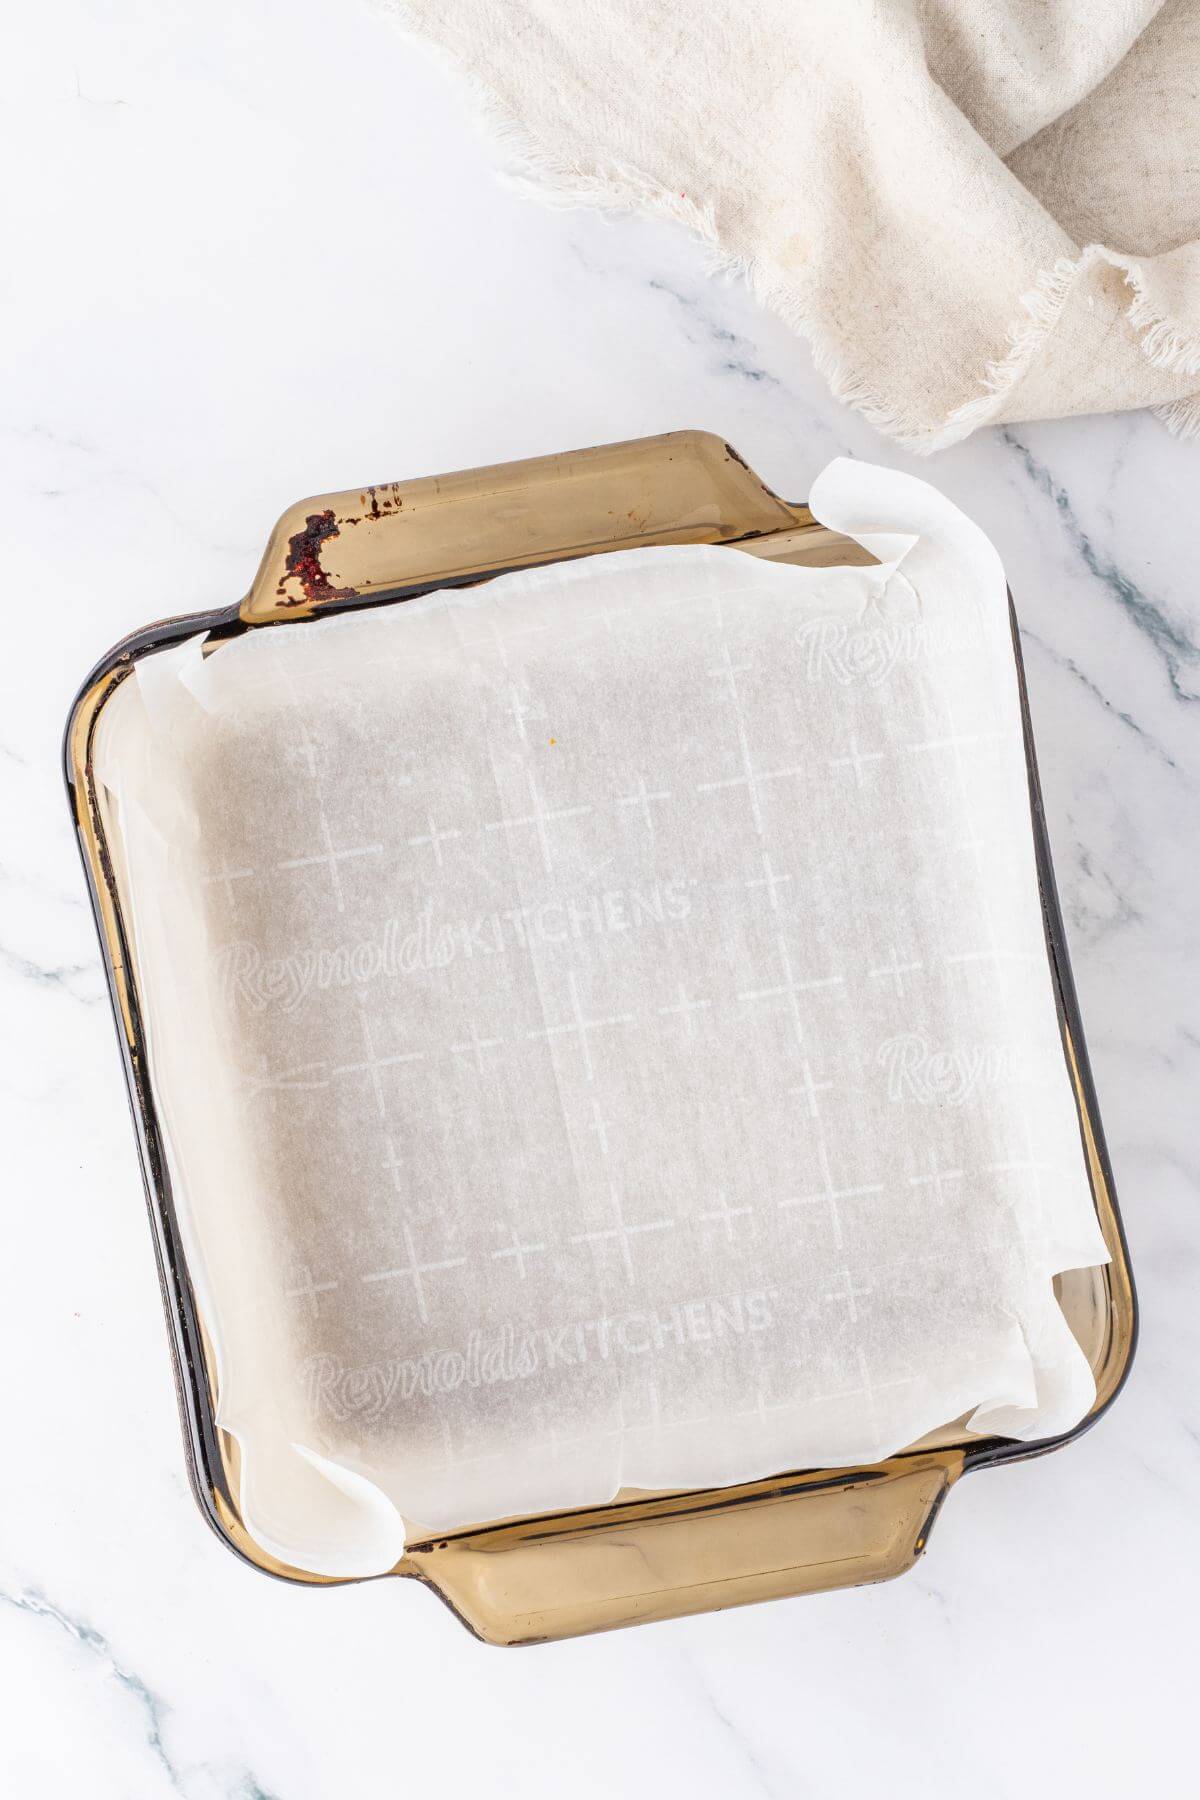 Square pan lined with parchment paper for hot chocolate fudge. 